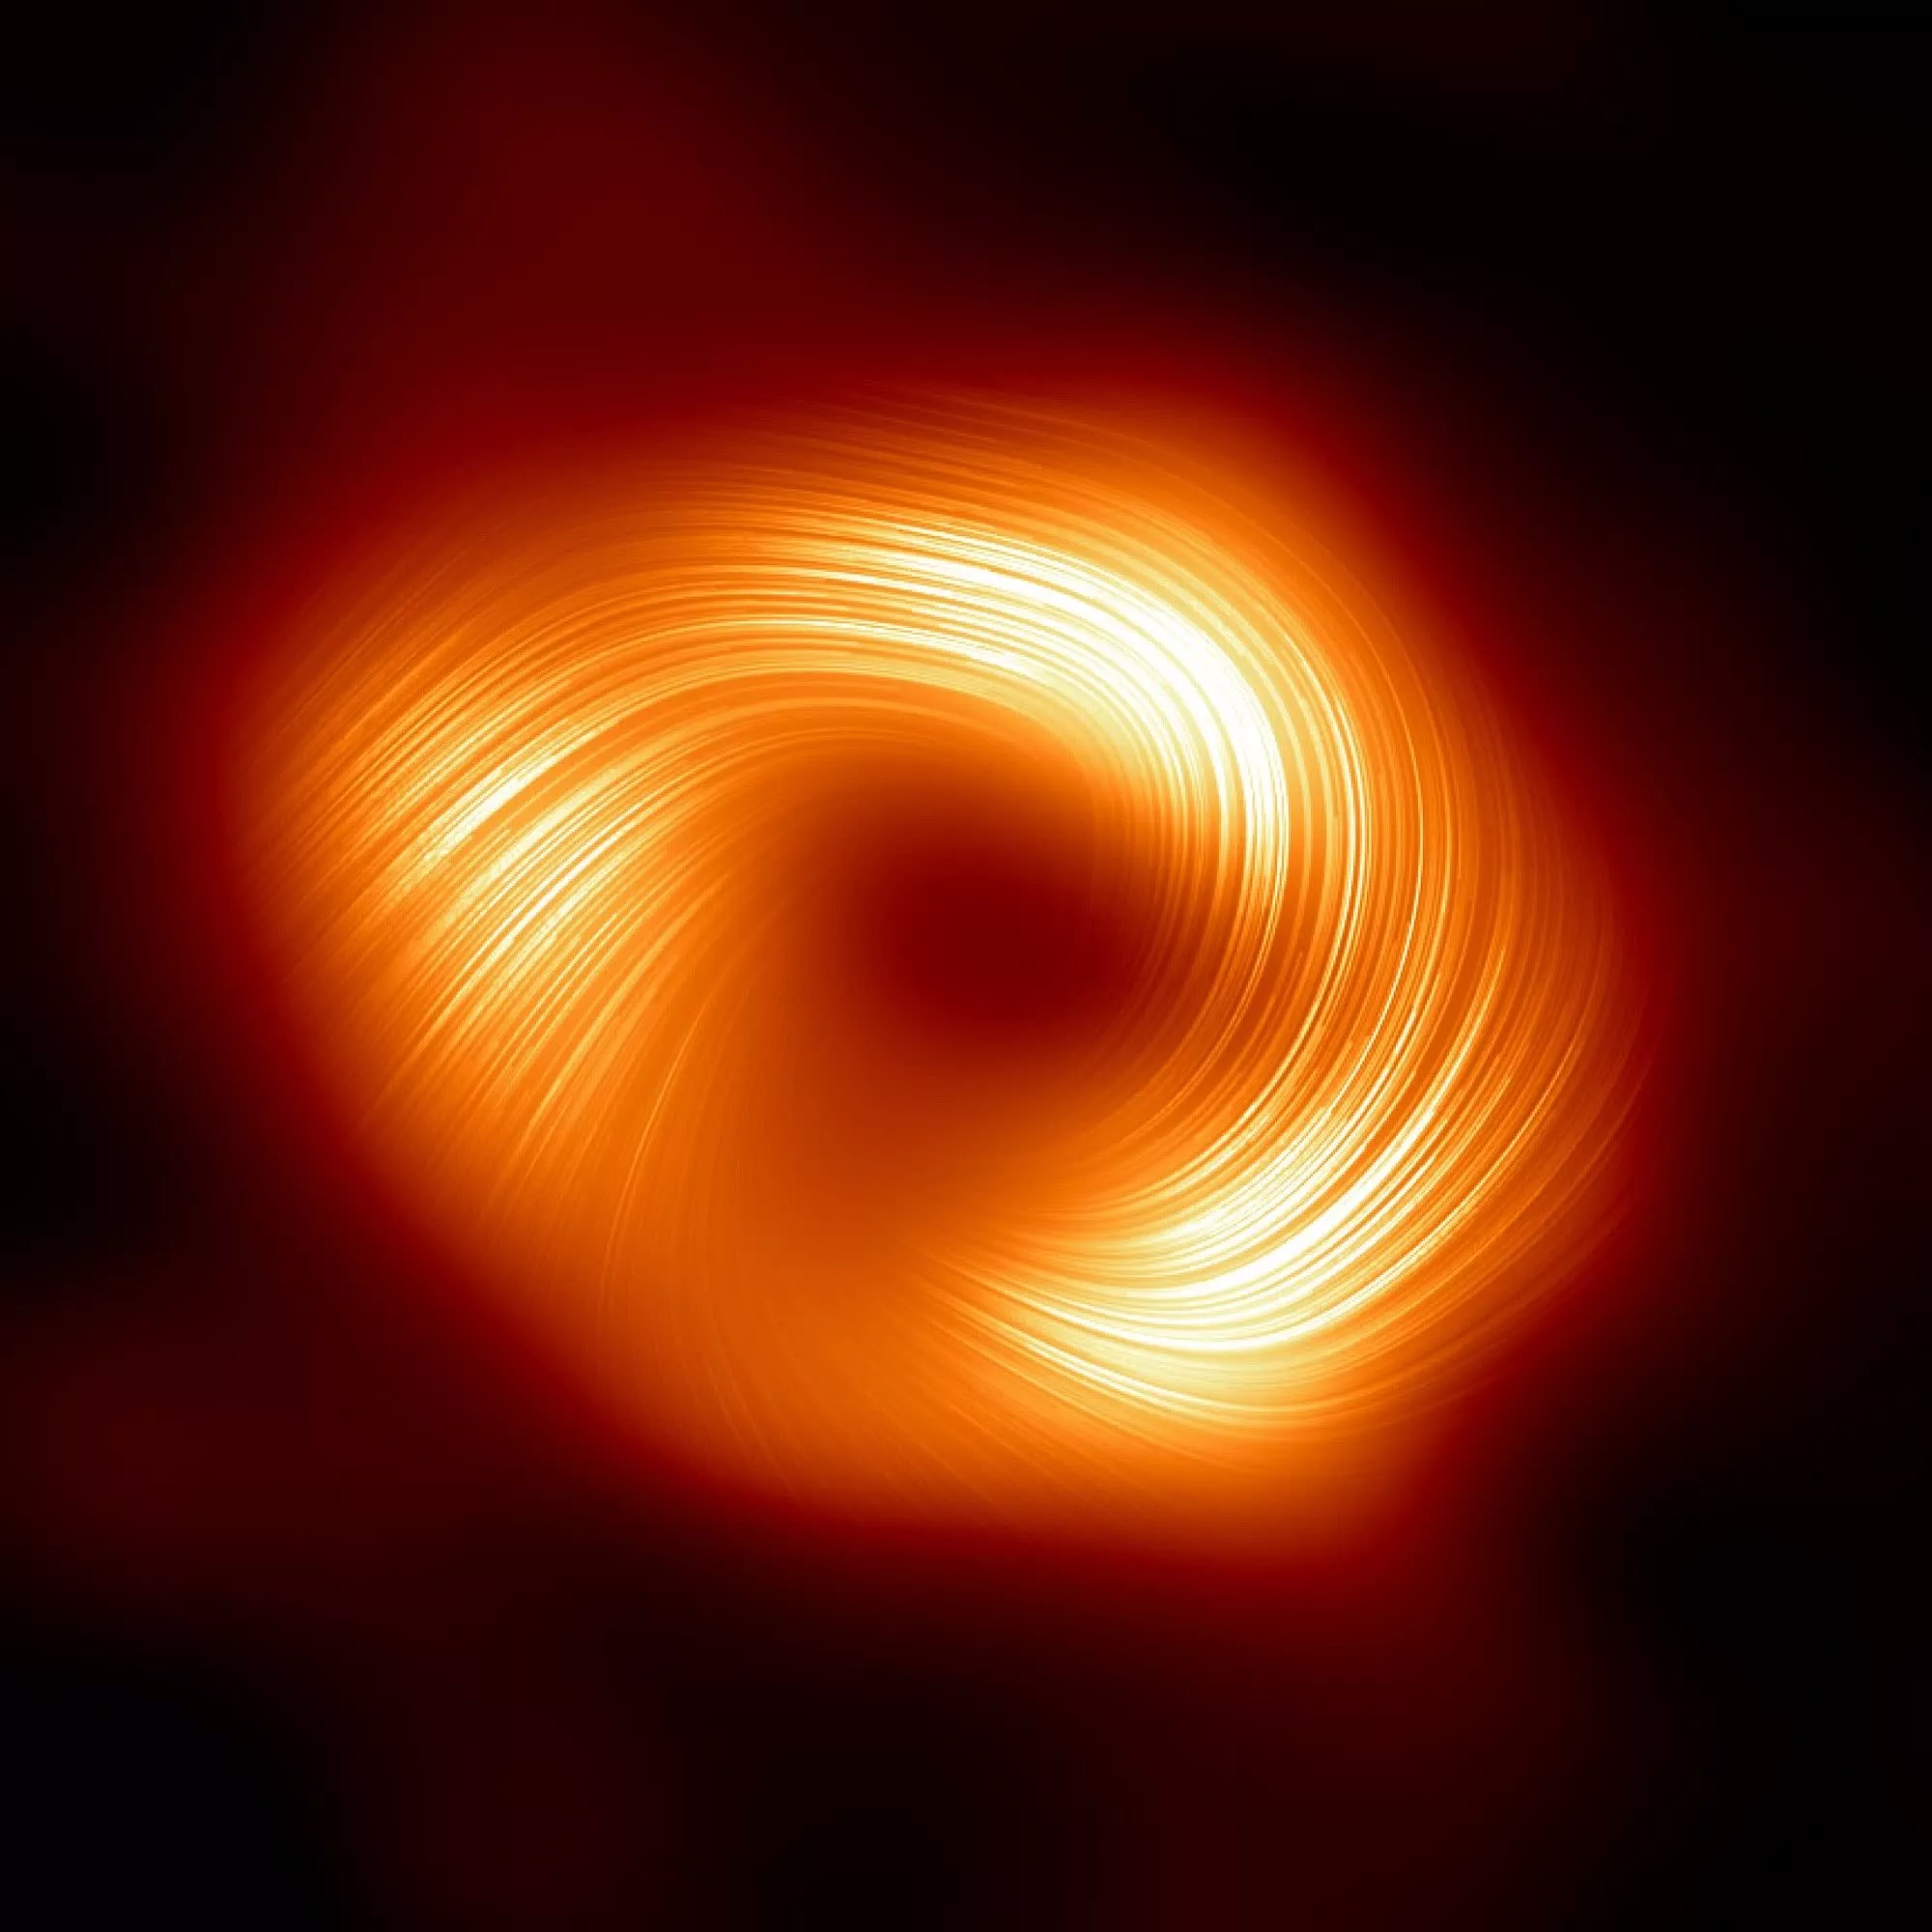 Here is what it would look like if you traveled into the event horizon of a black hole